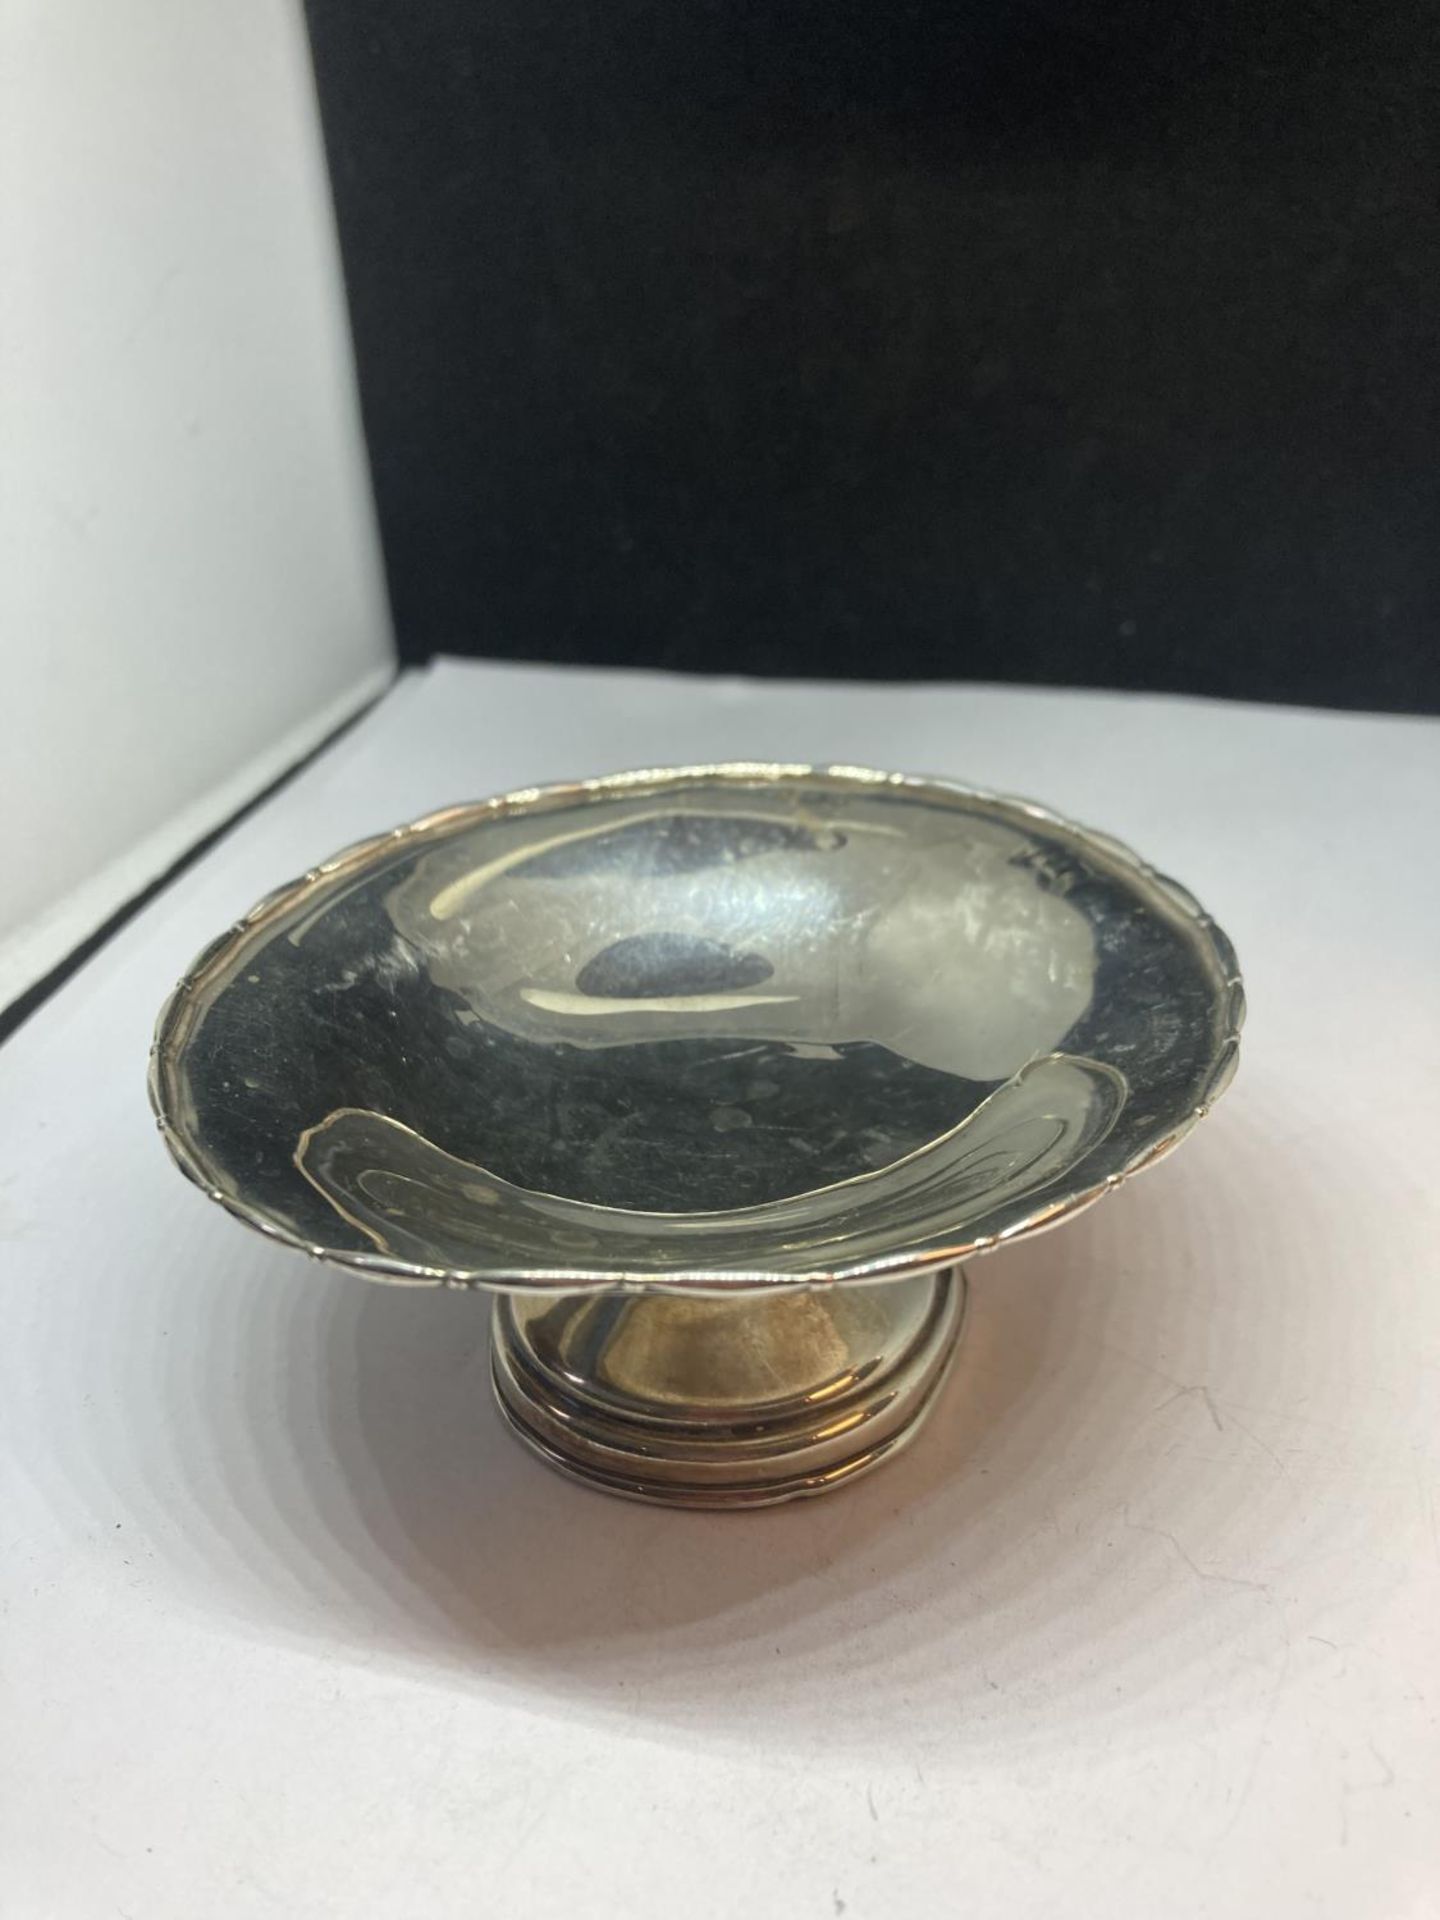 A HALLMARKED BIRMINGHAM SILVER FOOTED DISH GROSS WEIGHT 39.8 GRAMS